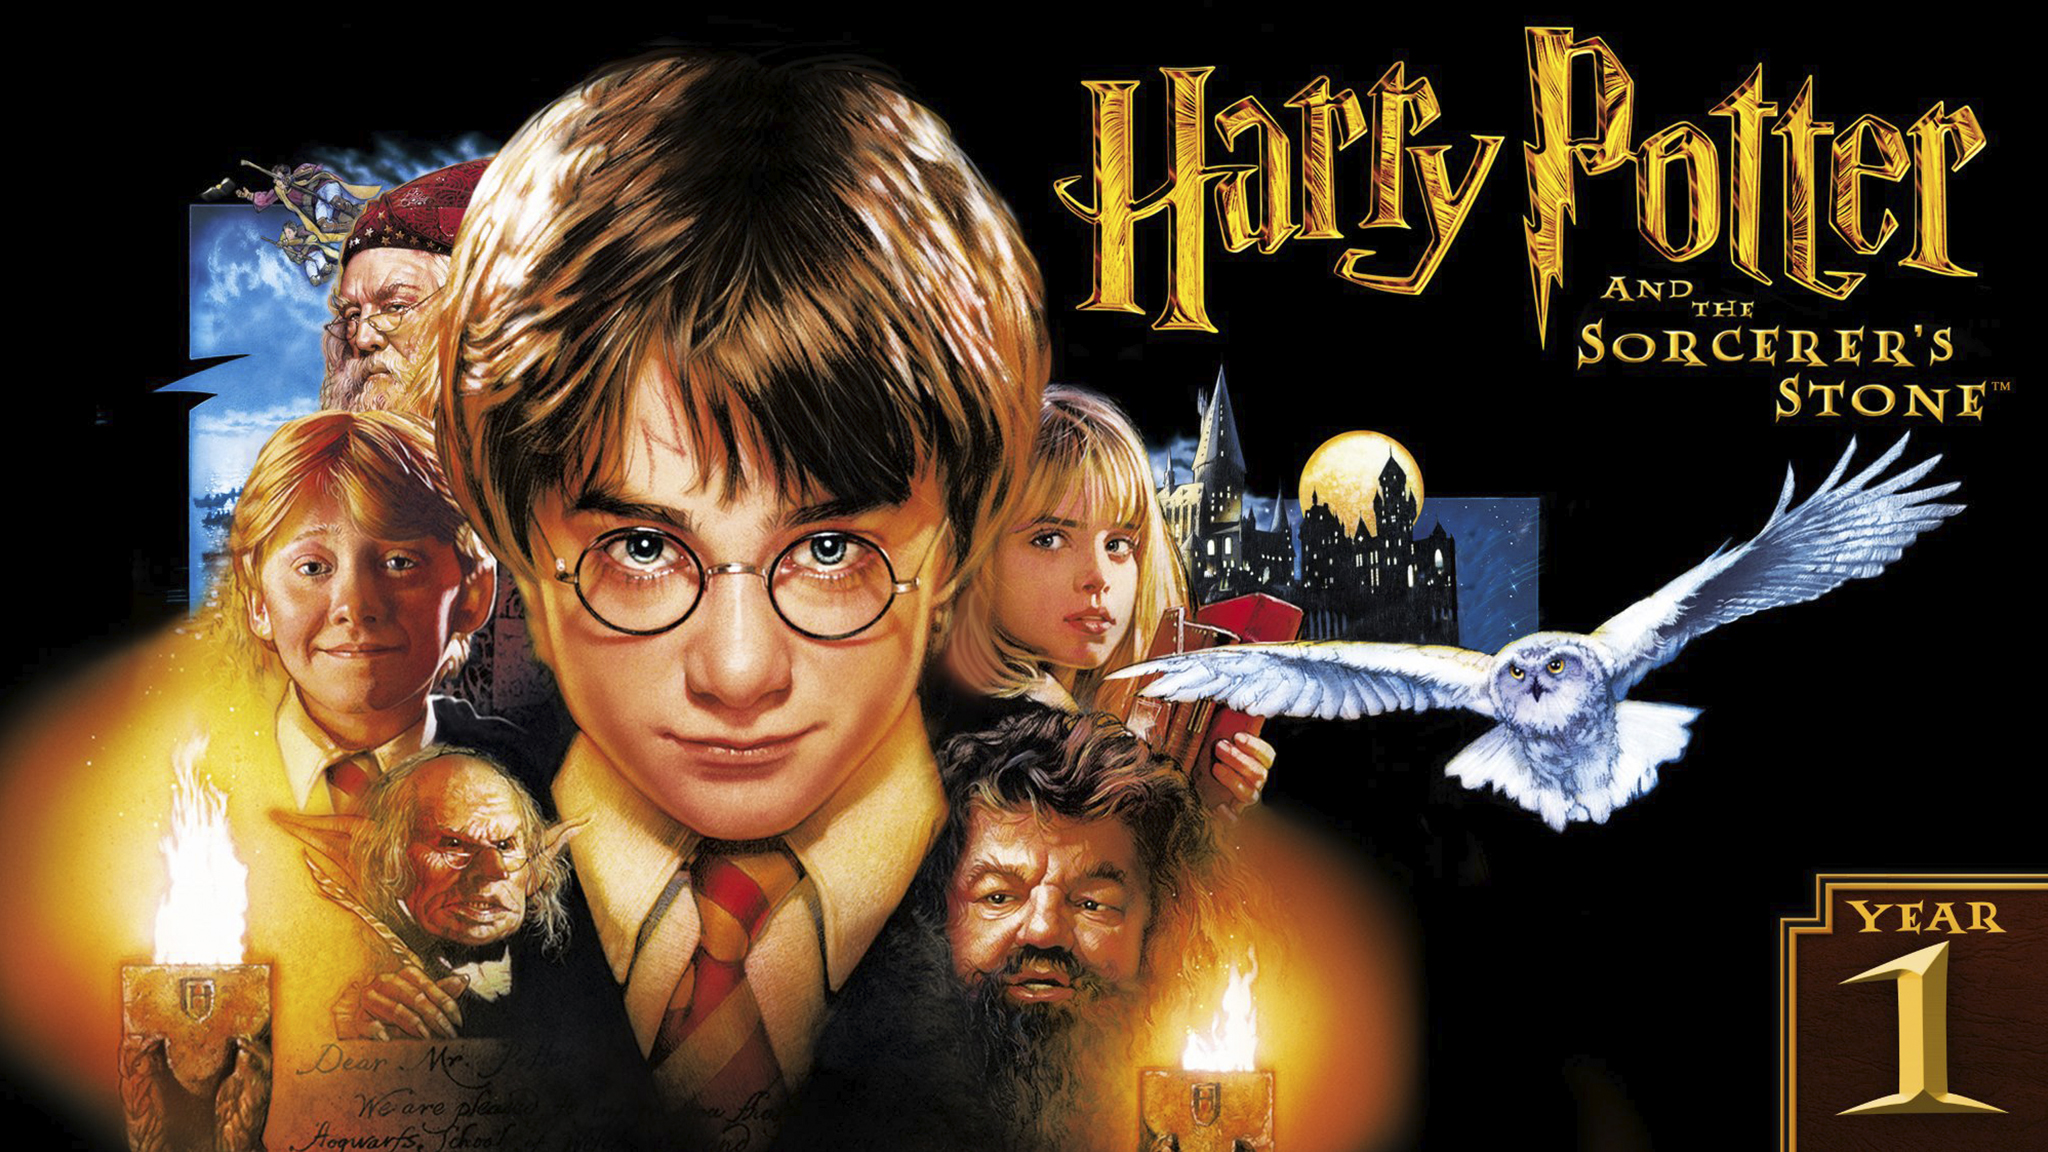 Harry Potter Movies online, free Youtube